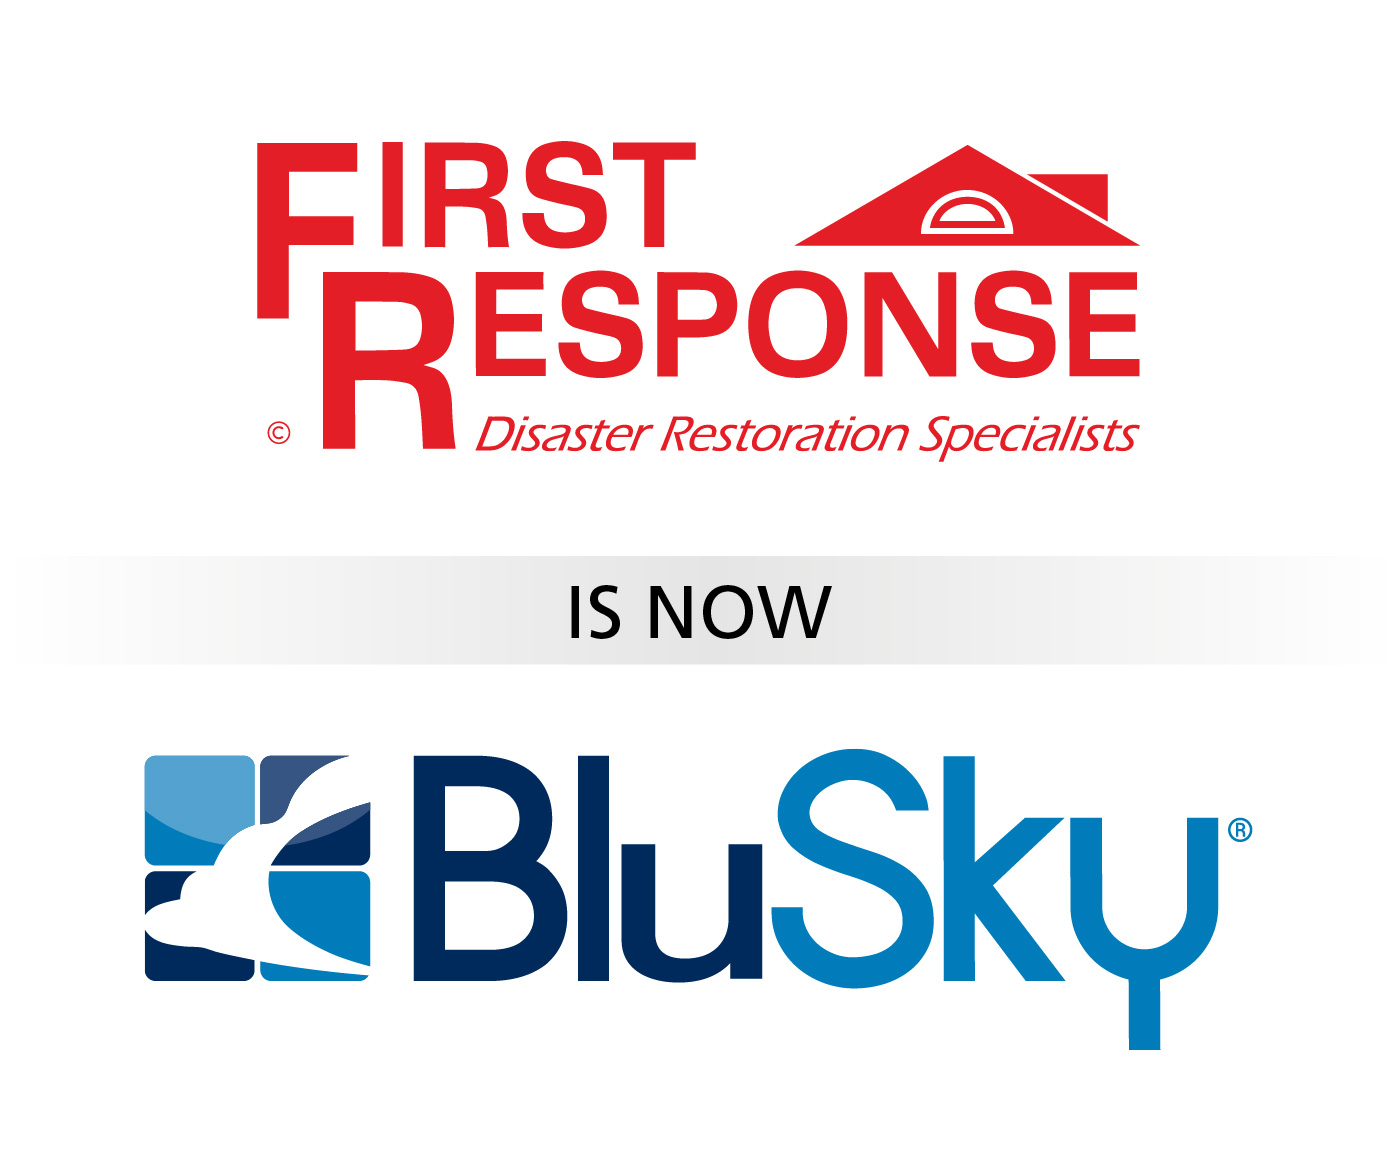 BluSky Restoration Contractors Announces Merger with Indiana-Based First Response